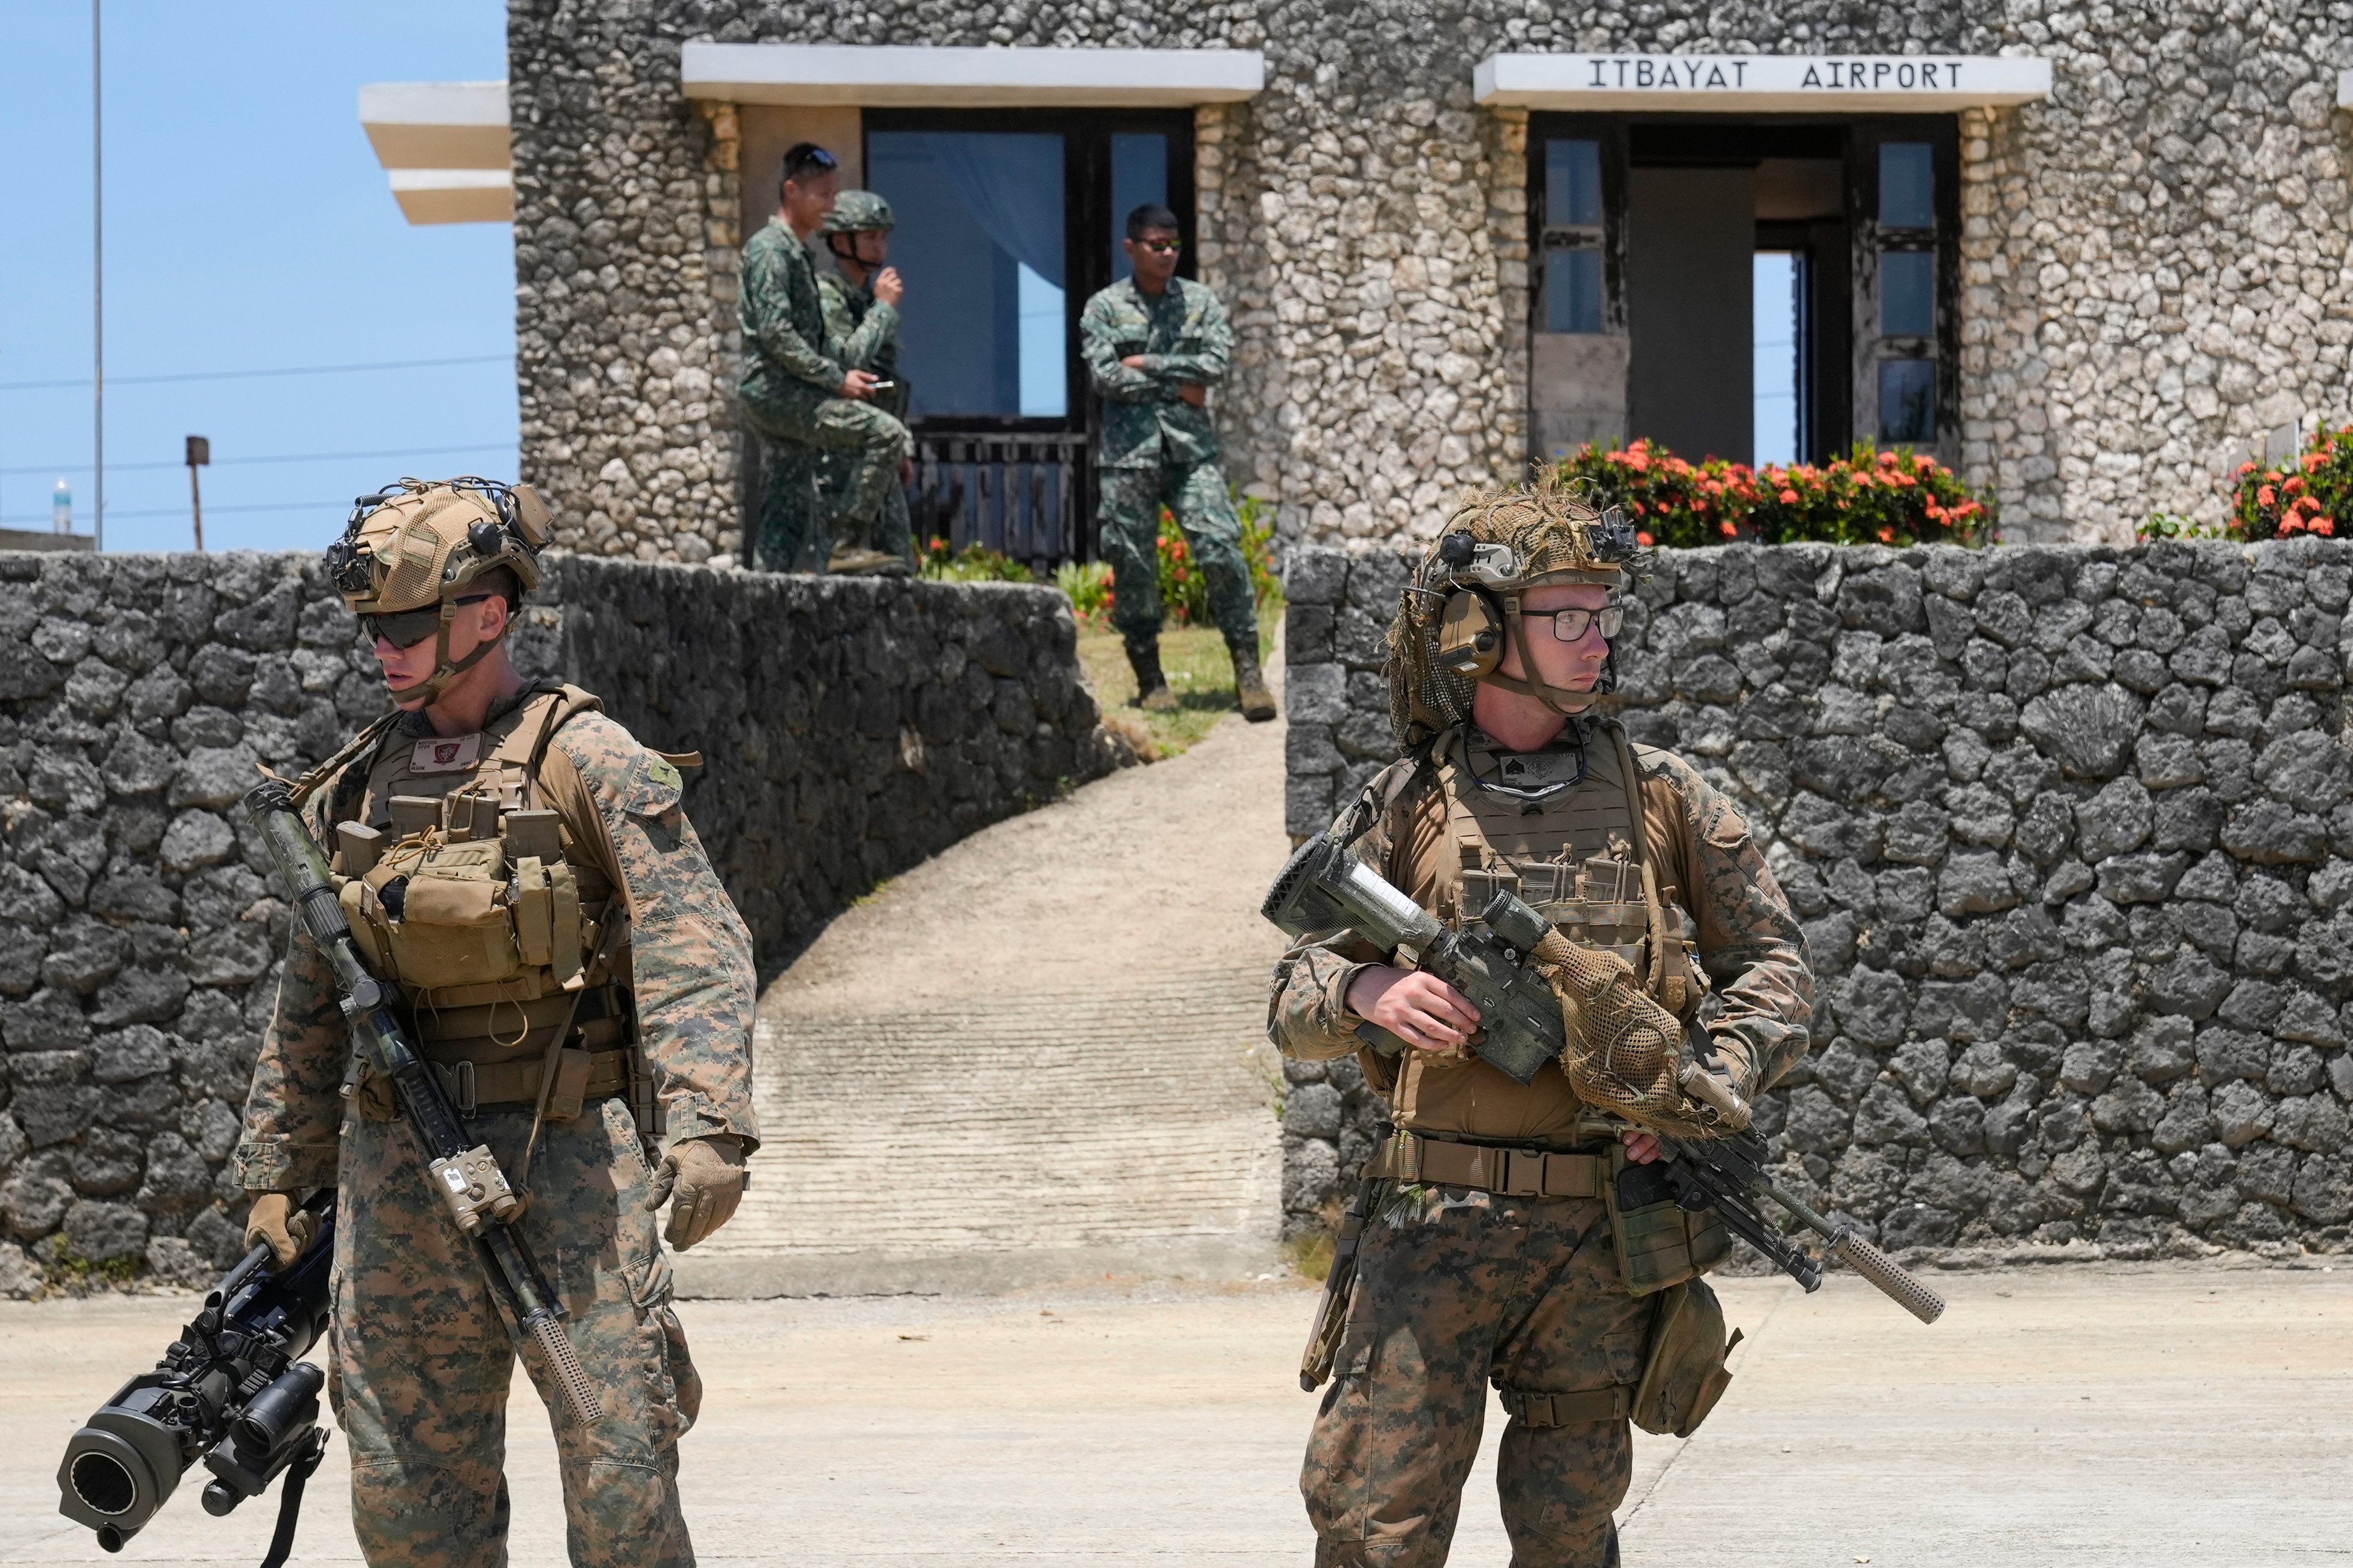 US troopers secure an airport at the Philippines’ northernmost town of Itbayat, Batanes province, during the Balikatan joint military exercises on Monday. Photo: AP